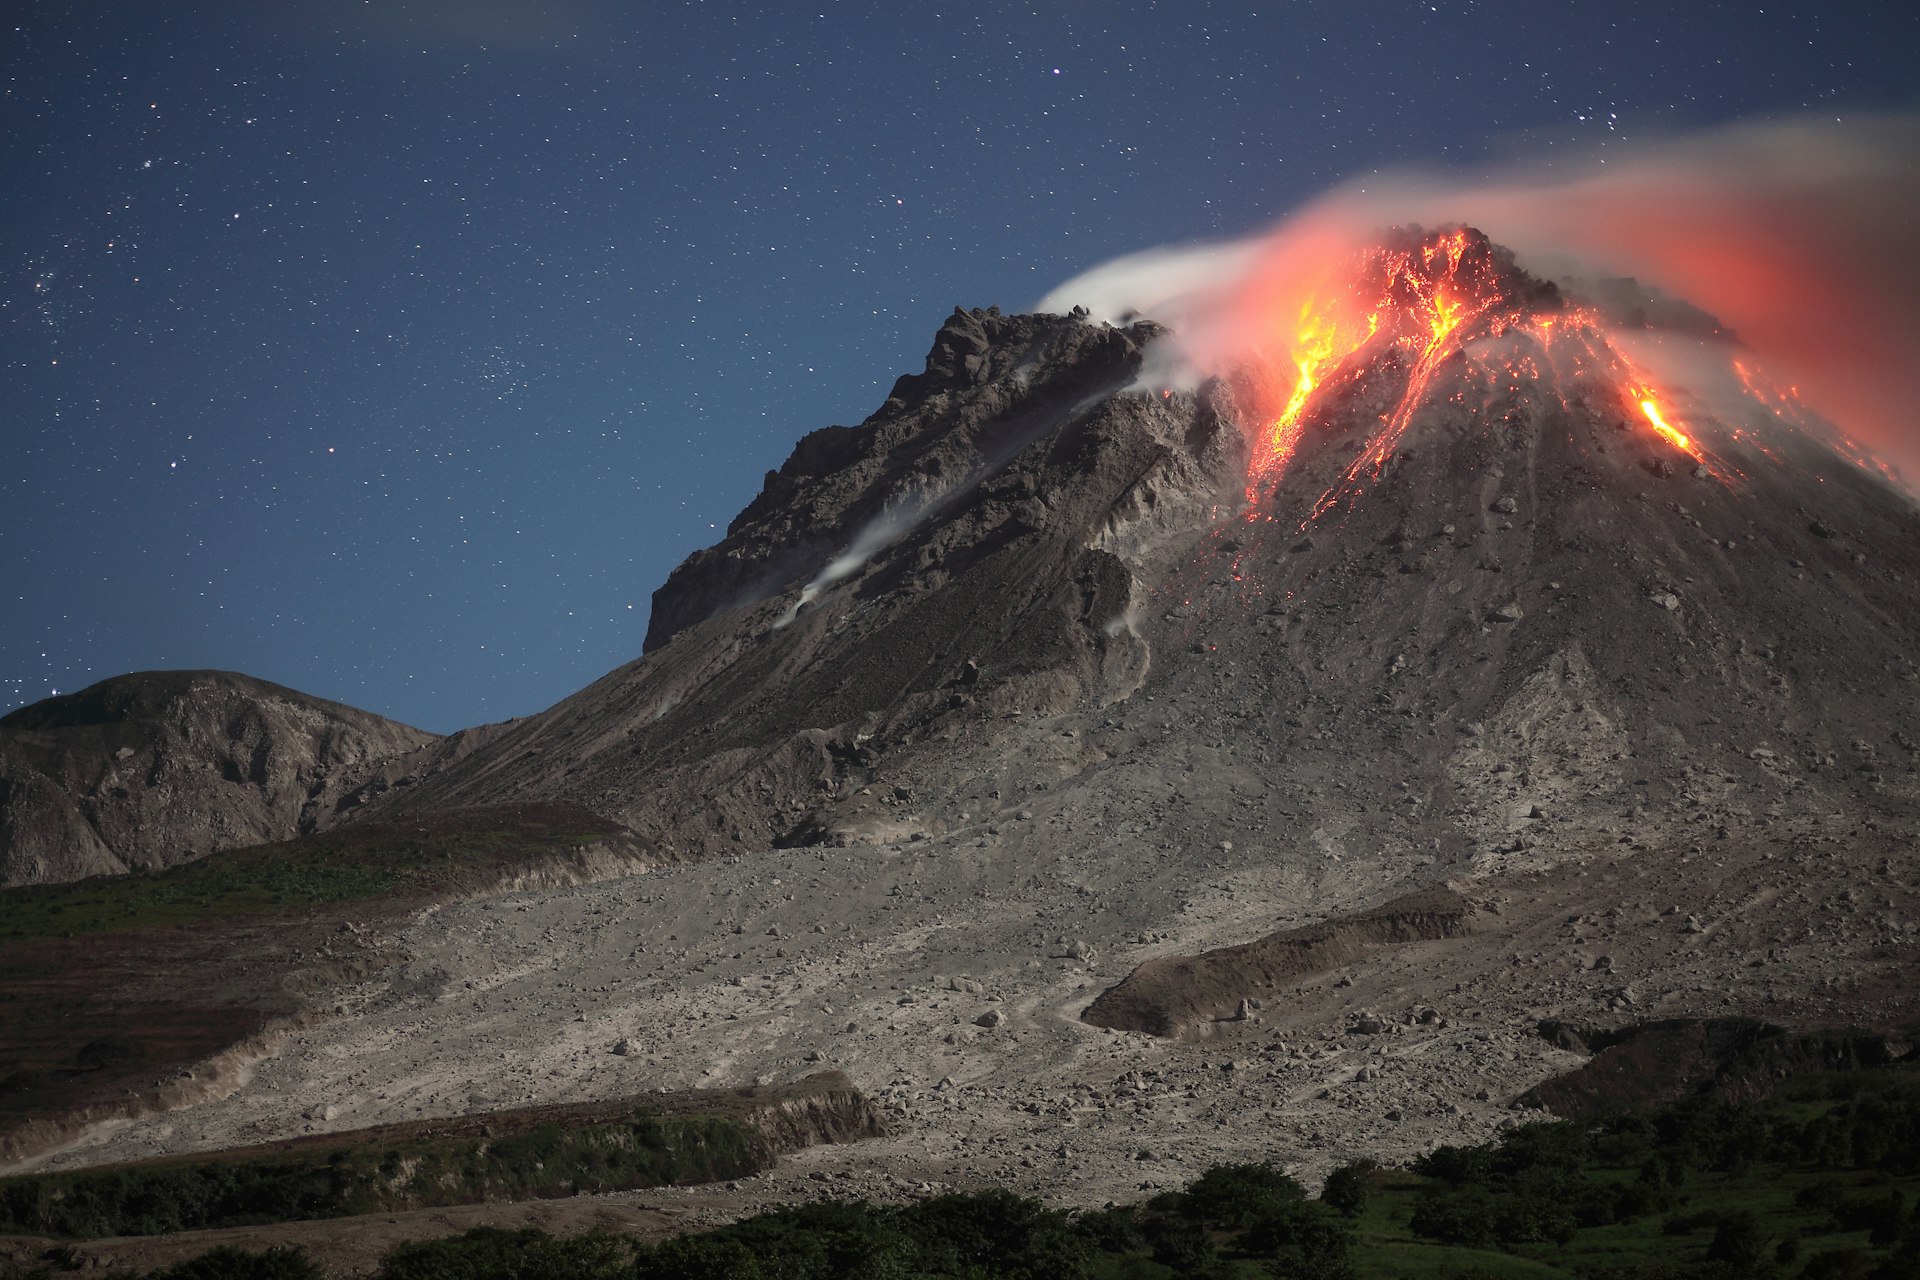 The Soufriere Hills Volcano incandescent lava dome at night